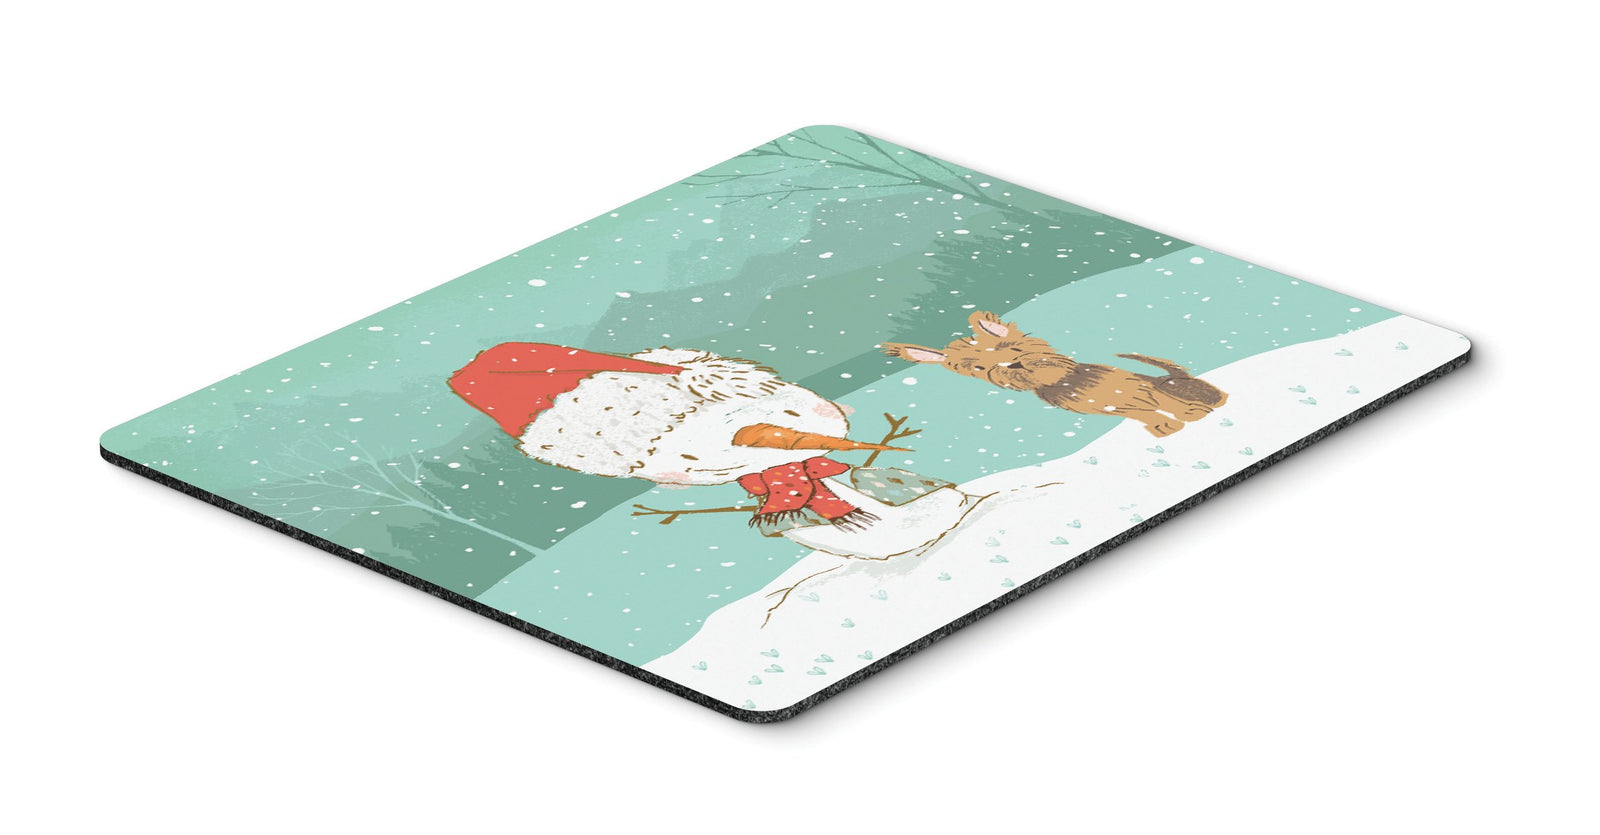 Yorkie Cropped Ears Snowman Christmas Mouse Pad, Hot Pad or Trivet CK2098MP by Caroline's Treasures